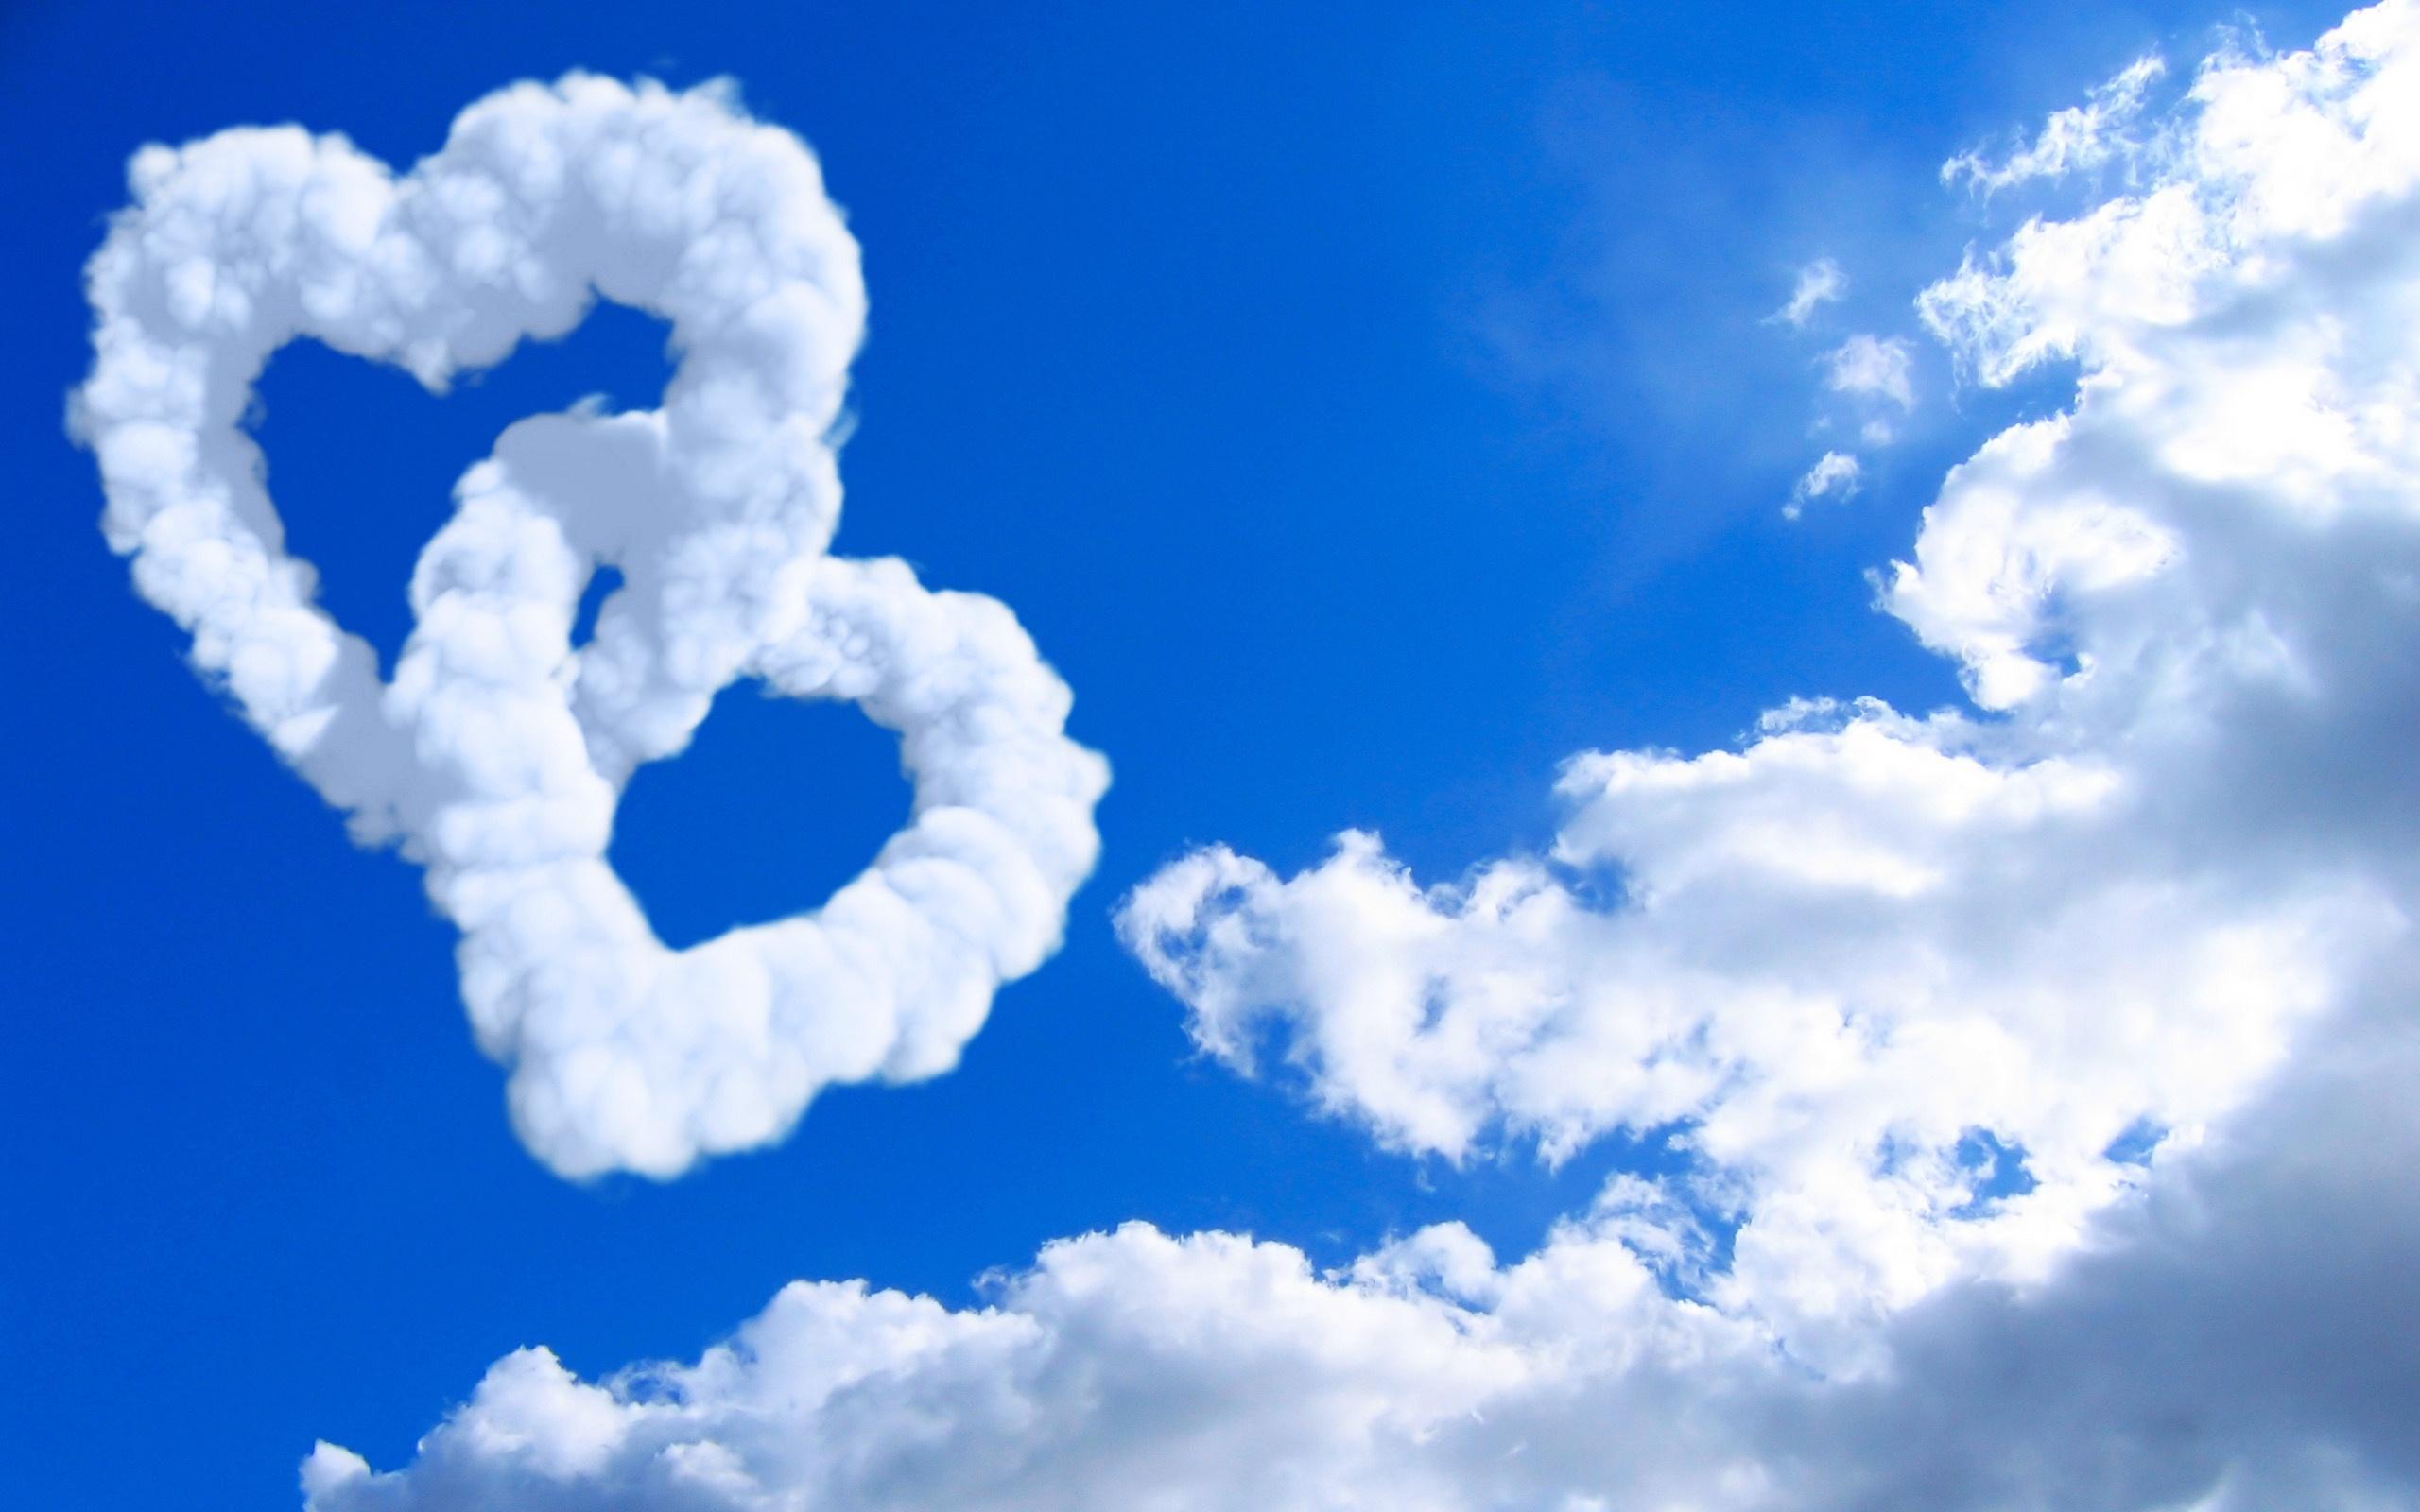 Love Hearts In The Sky Cool PC Wallpaper 2560x1600 - Life Wallpapers